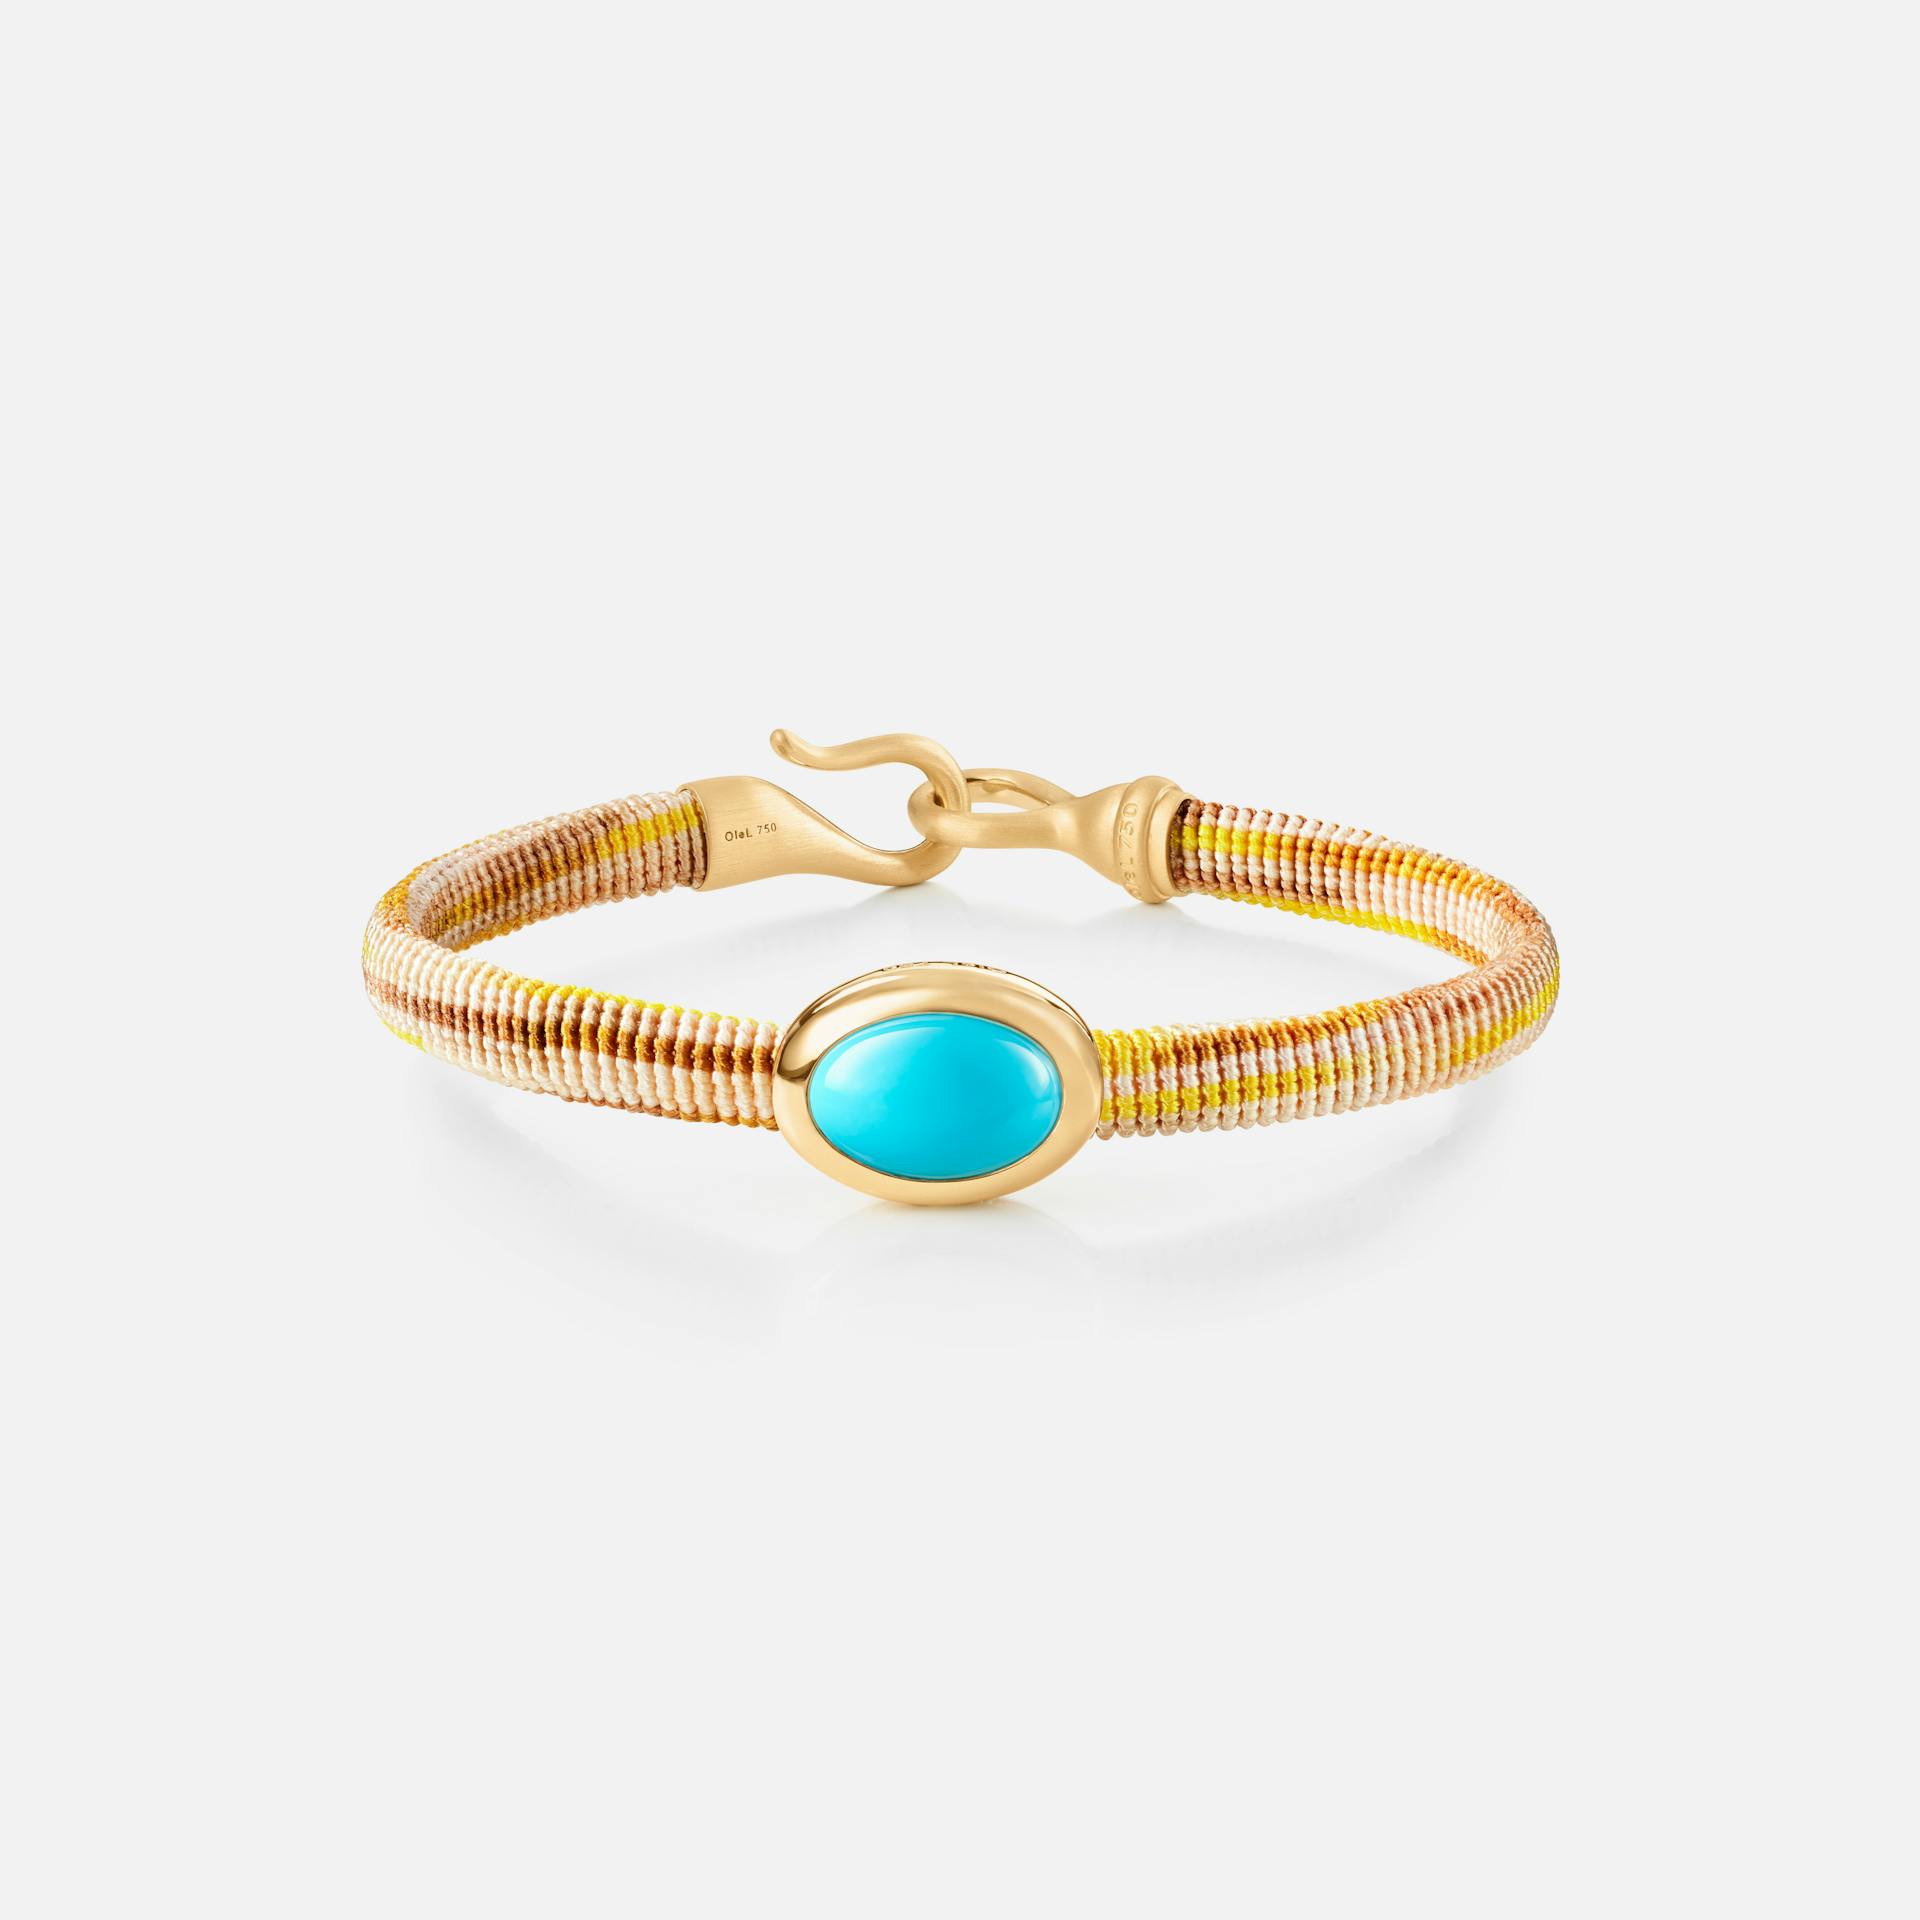 Life Bracelet with turquoise 6 mm 18k gold and turquoise with Golden rope